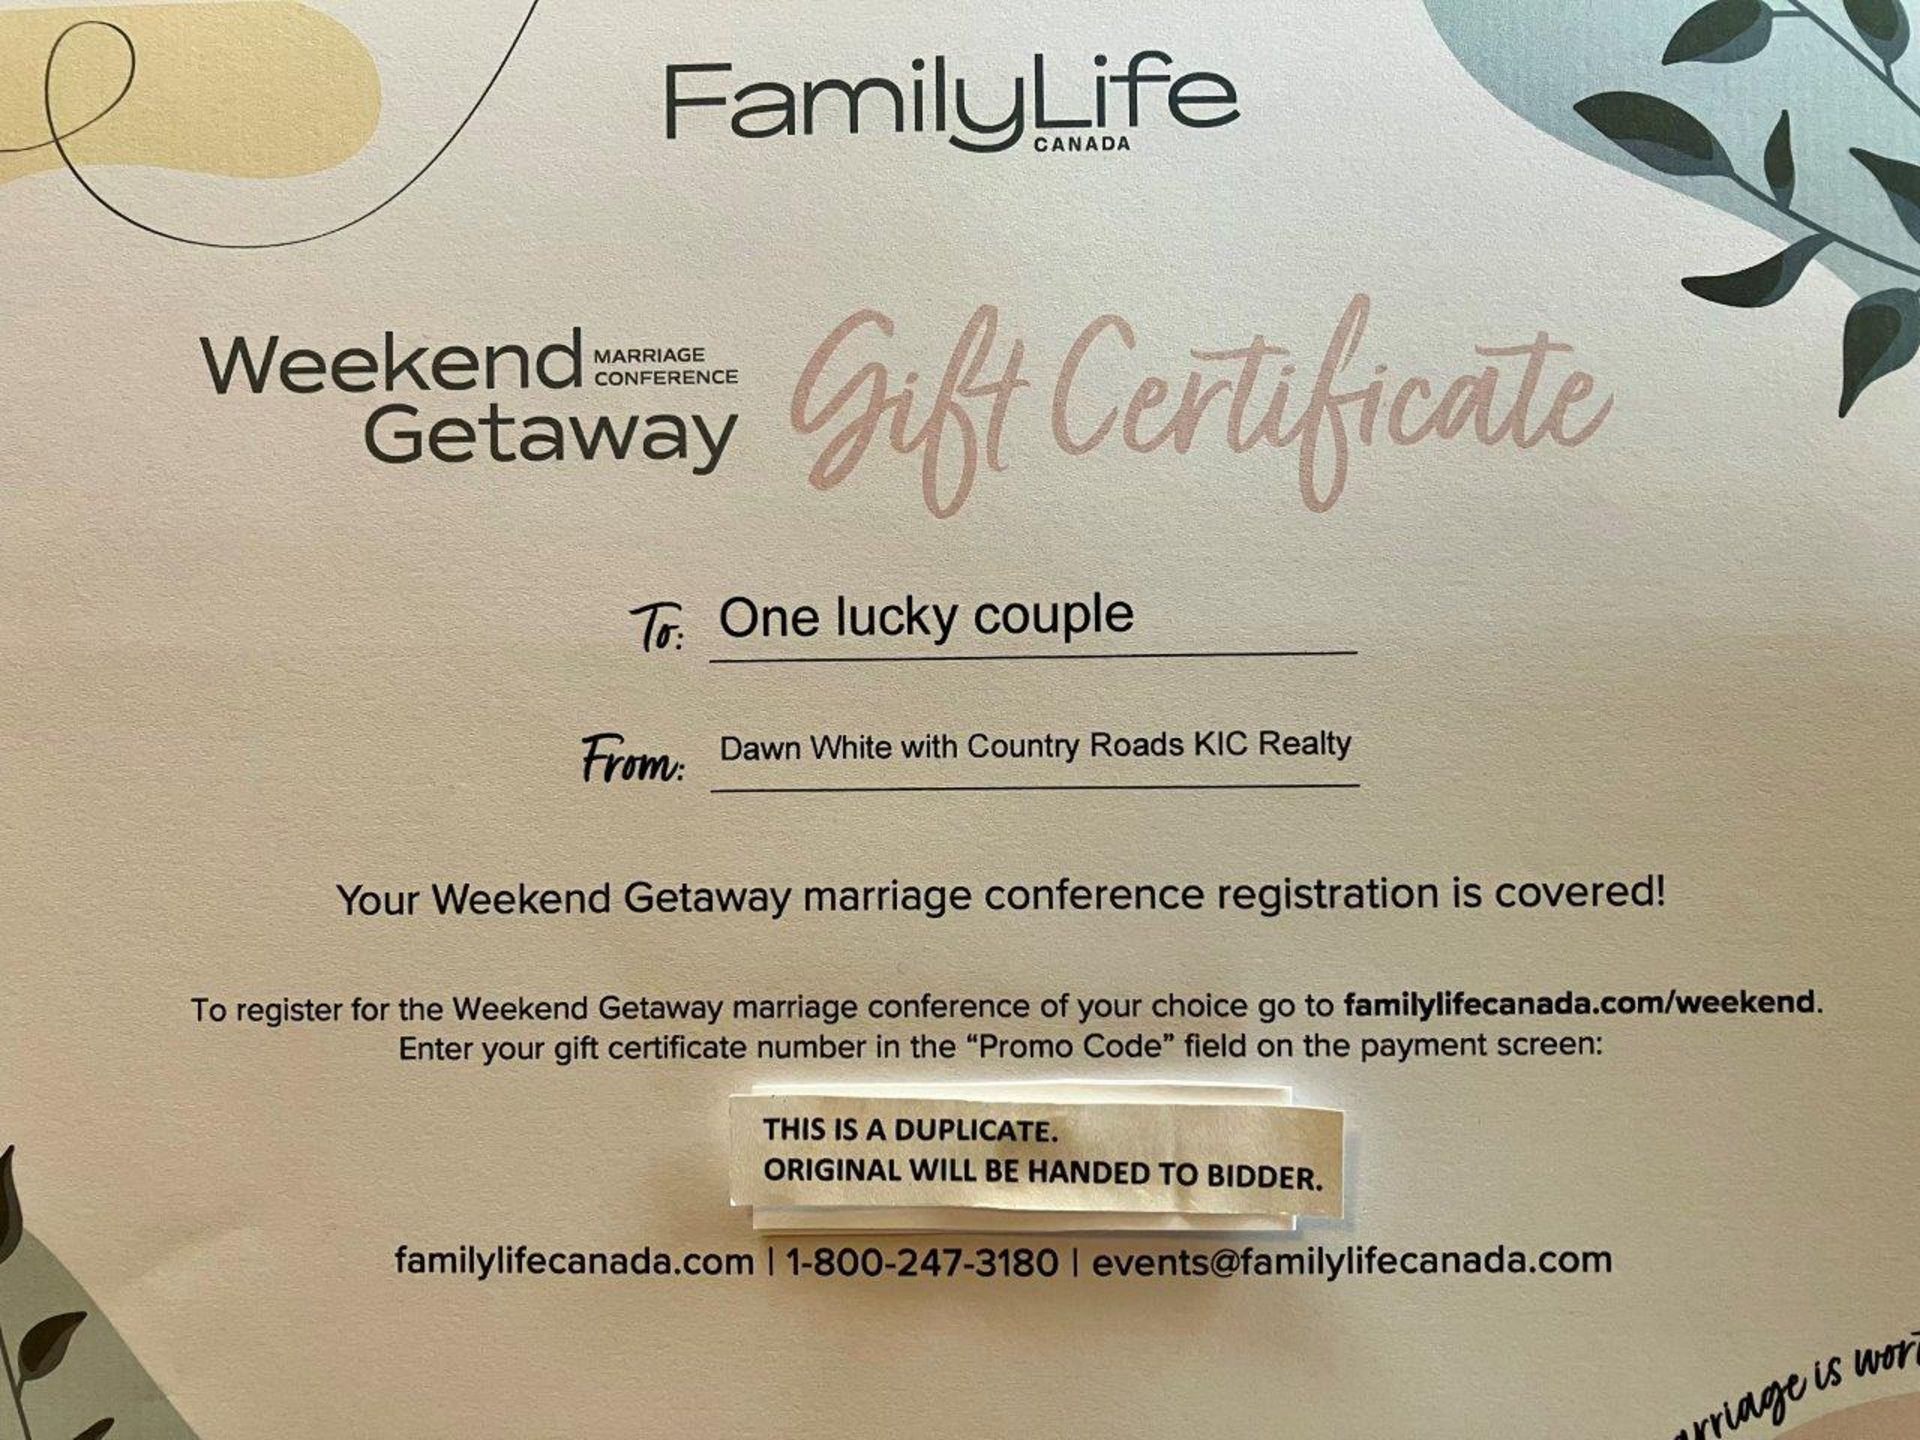 FAMILY LIFE CANADA COUPLES WEEKEND GETAWAY GIFT CERTFICATE - Image 2 of 3